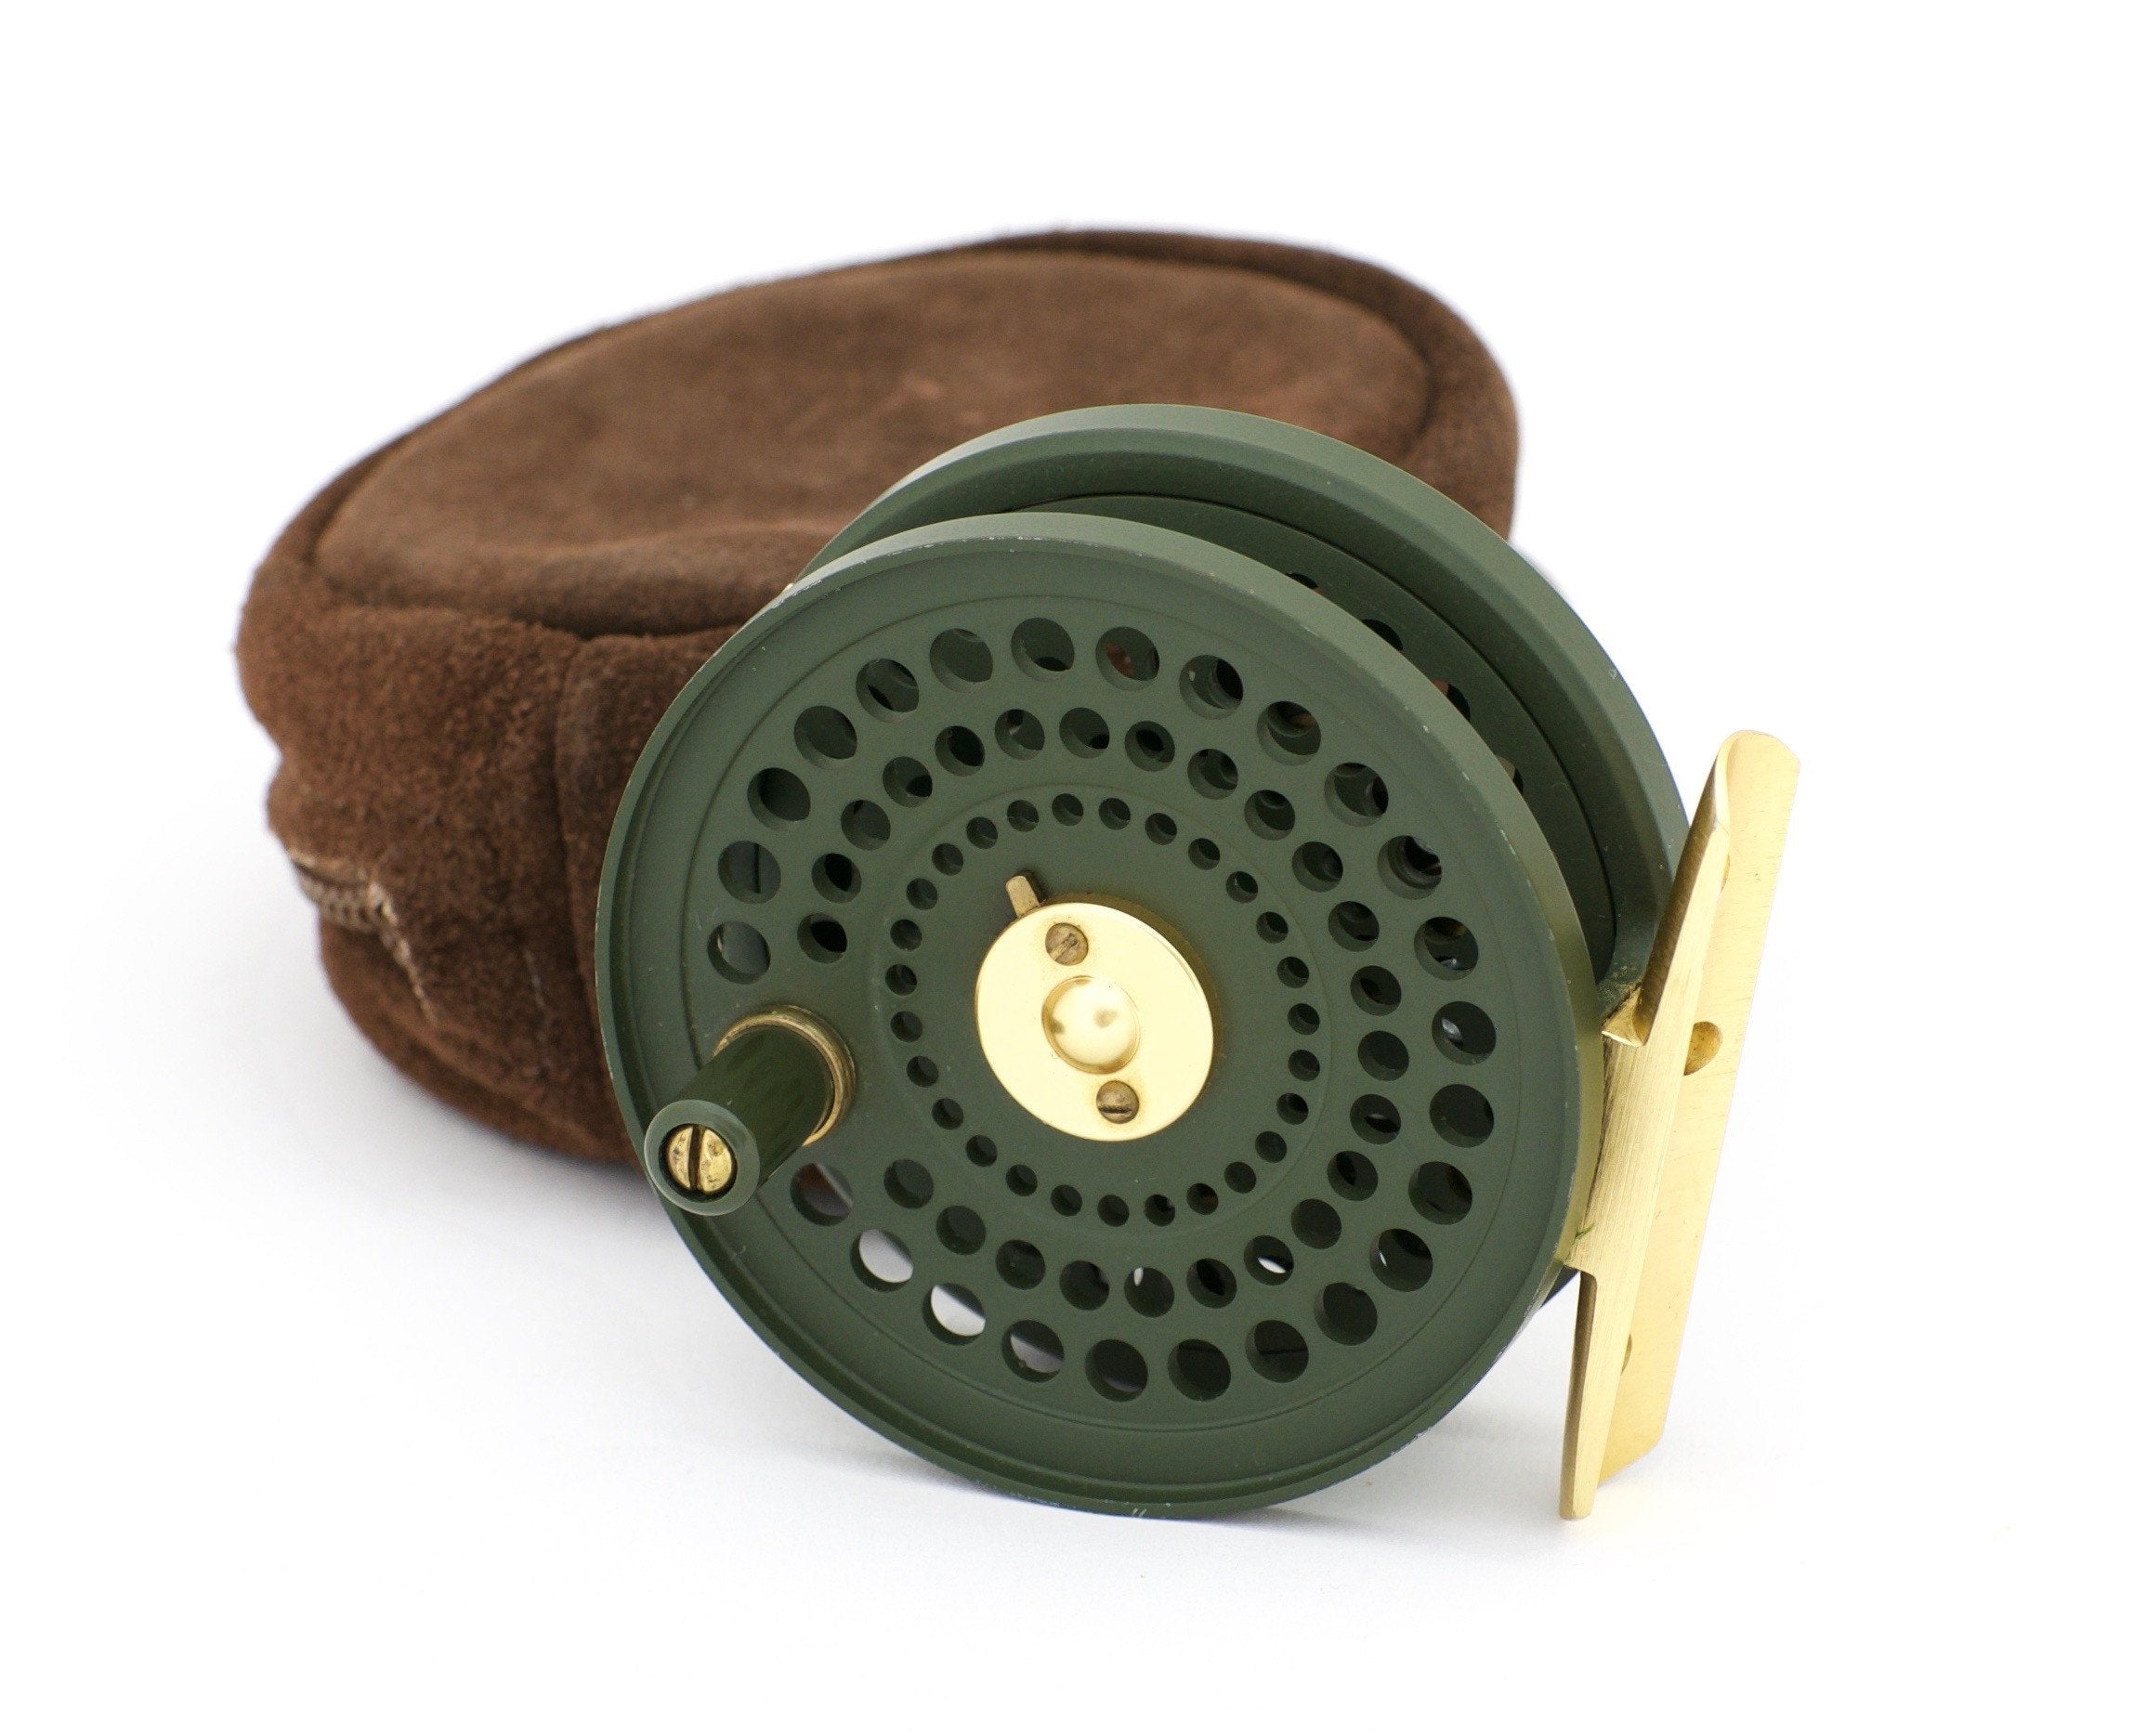 Orvis CFO 123 Limited Edition Fly Reel